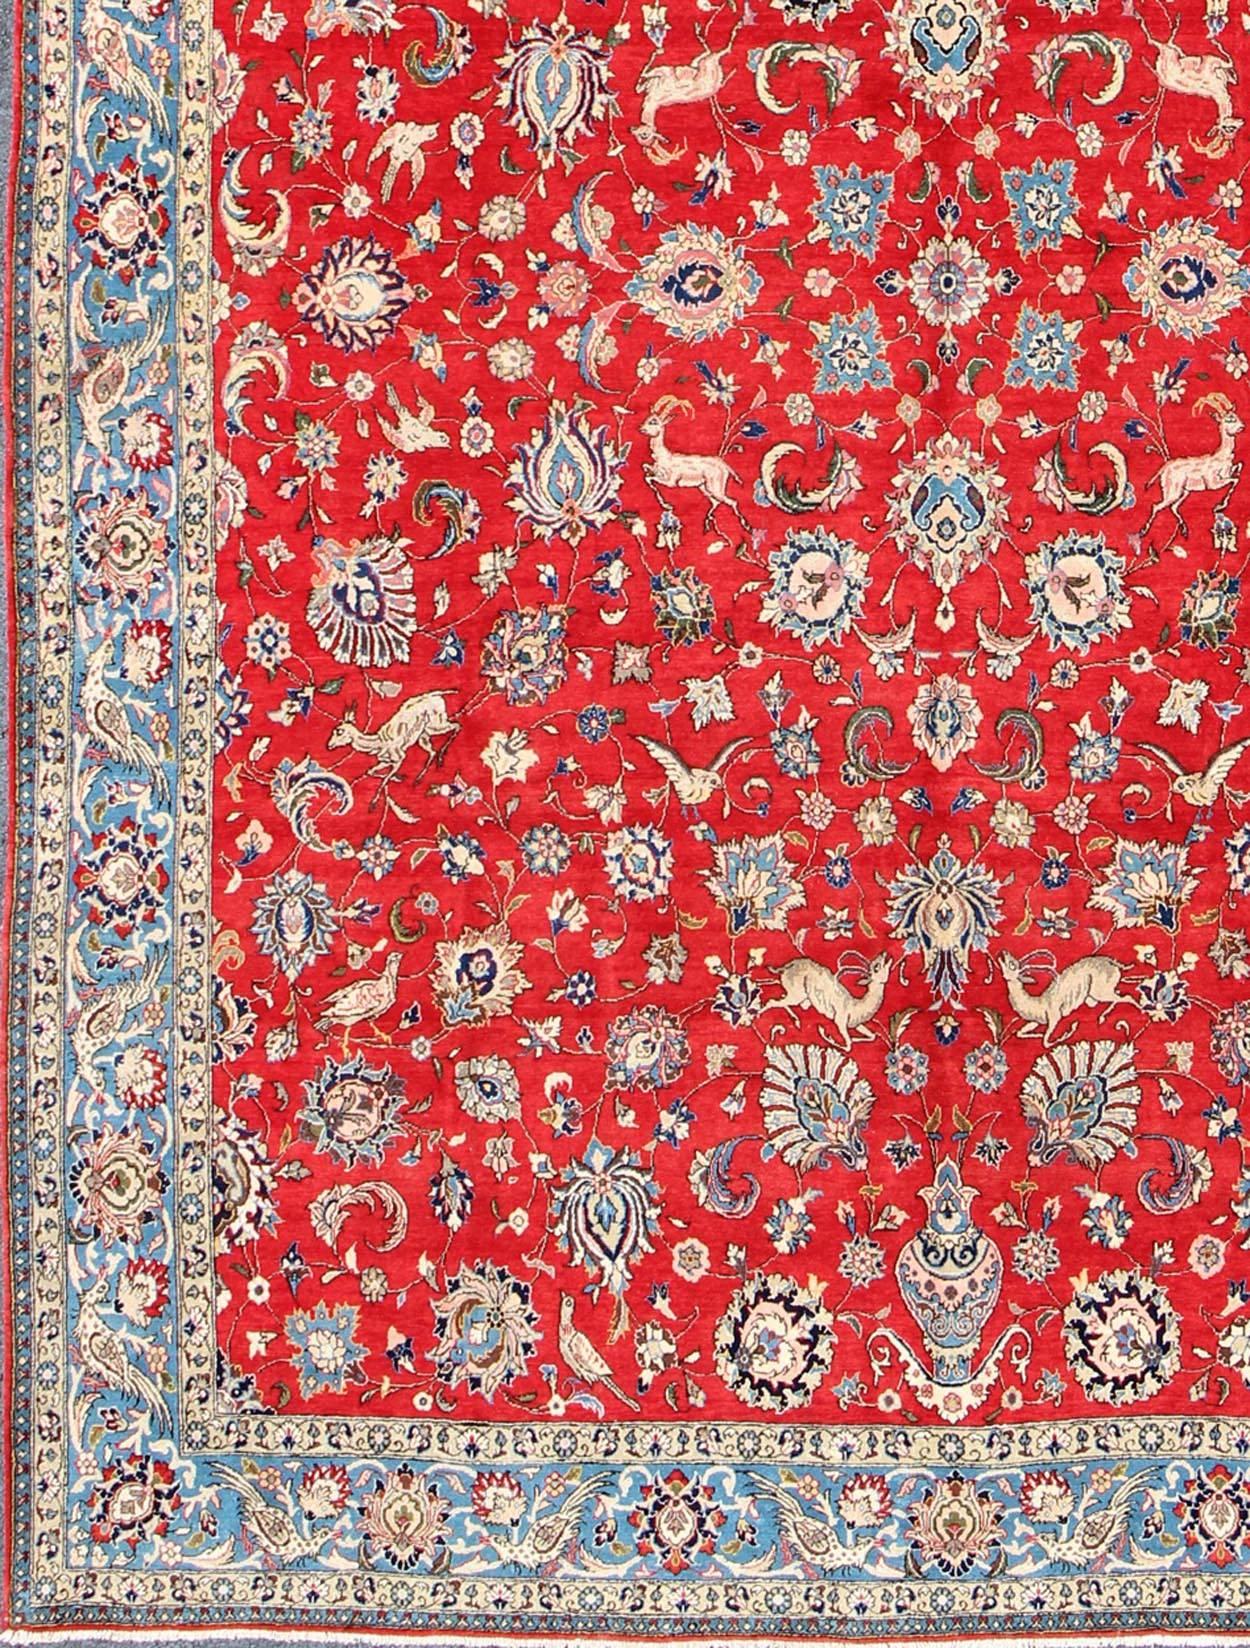 Vintage fine Persian Isfahan rug with all-over floral design, red background and Blue Border, rug h-404-05, country of origin / type: Iran / Isfahan, circa 1950.

This outstanding midcentury Persian Isfahan carpet is primarily characterized by its